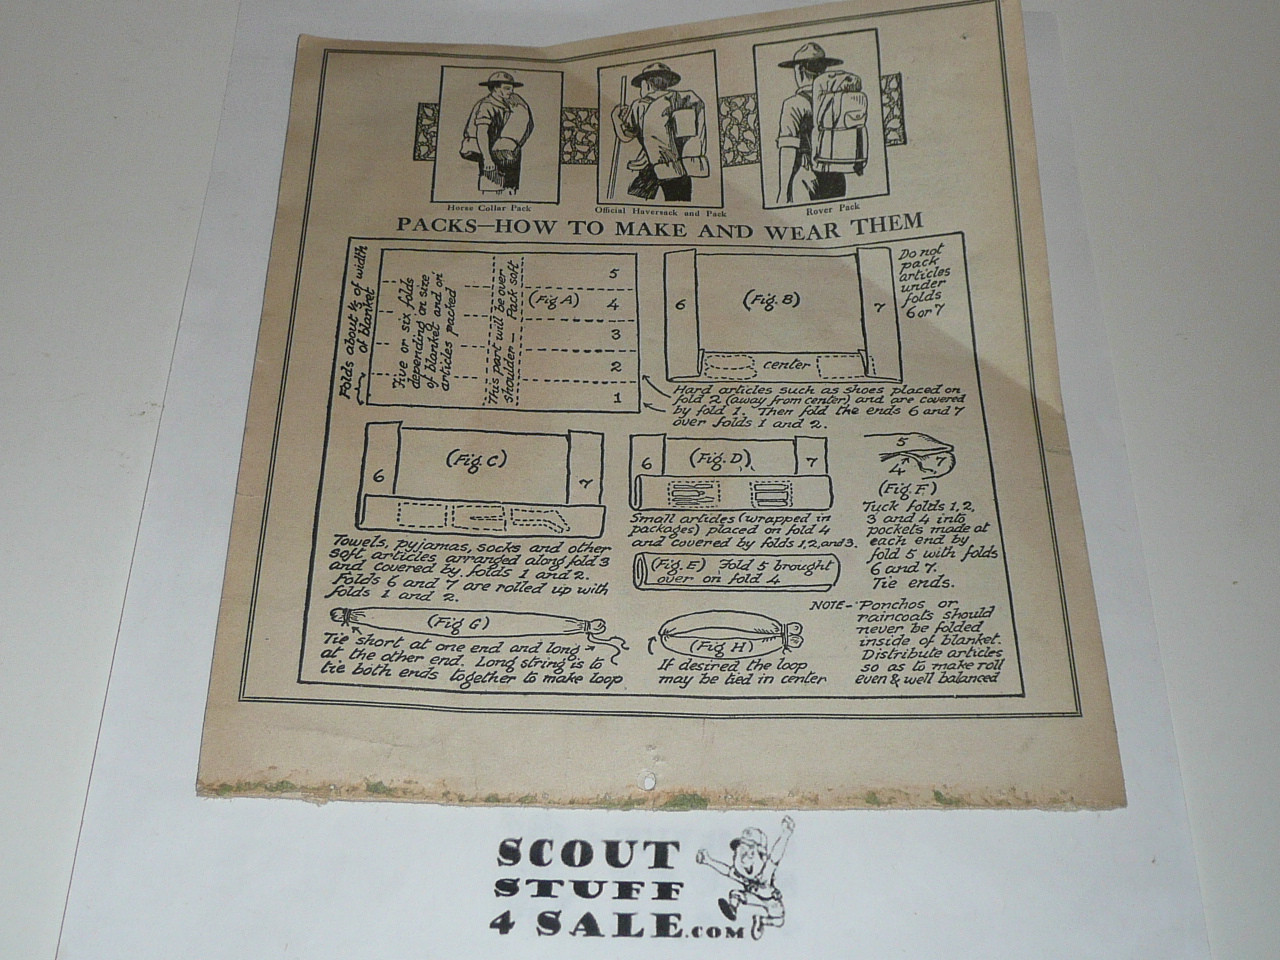 1929 Scout Daily Record, From Brown and Bigelow, Boy Scouts of America